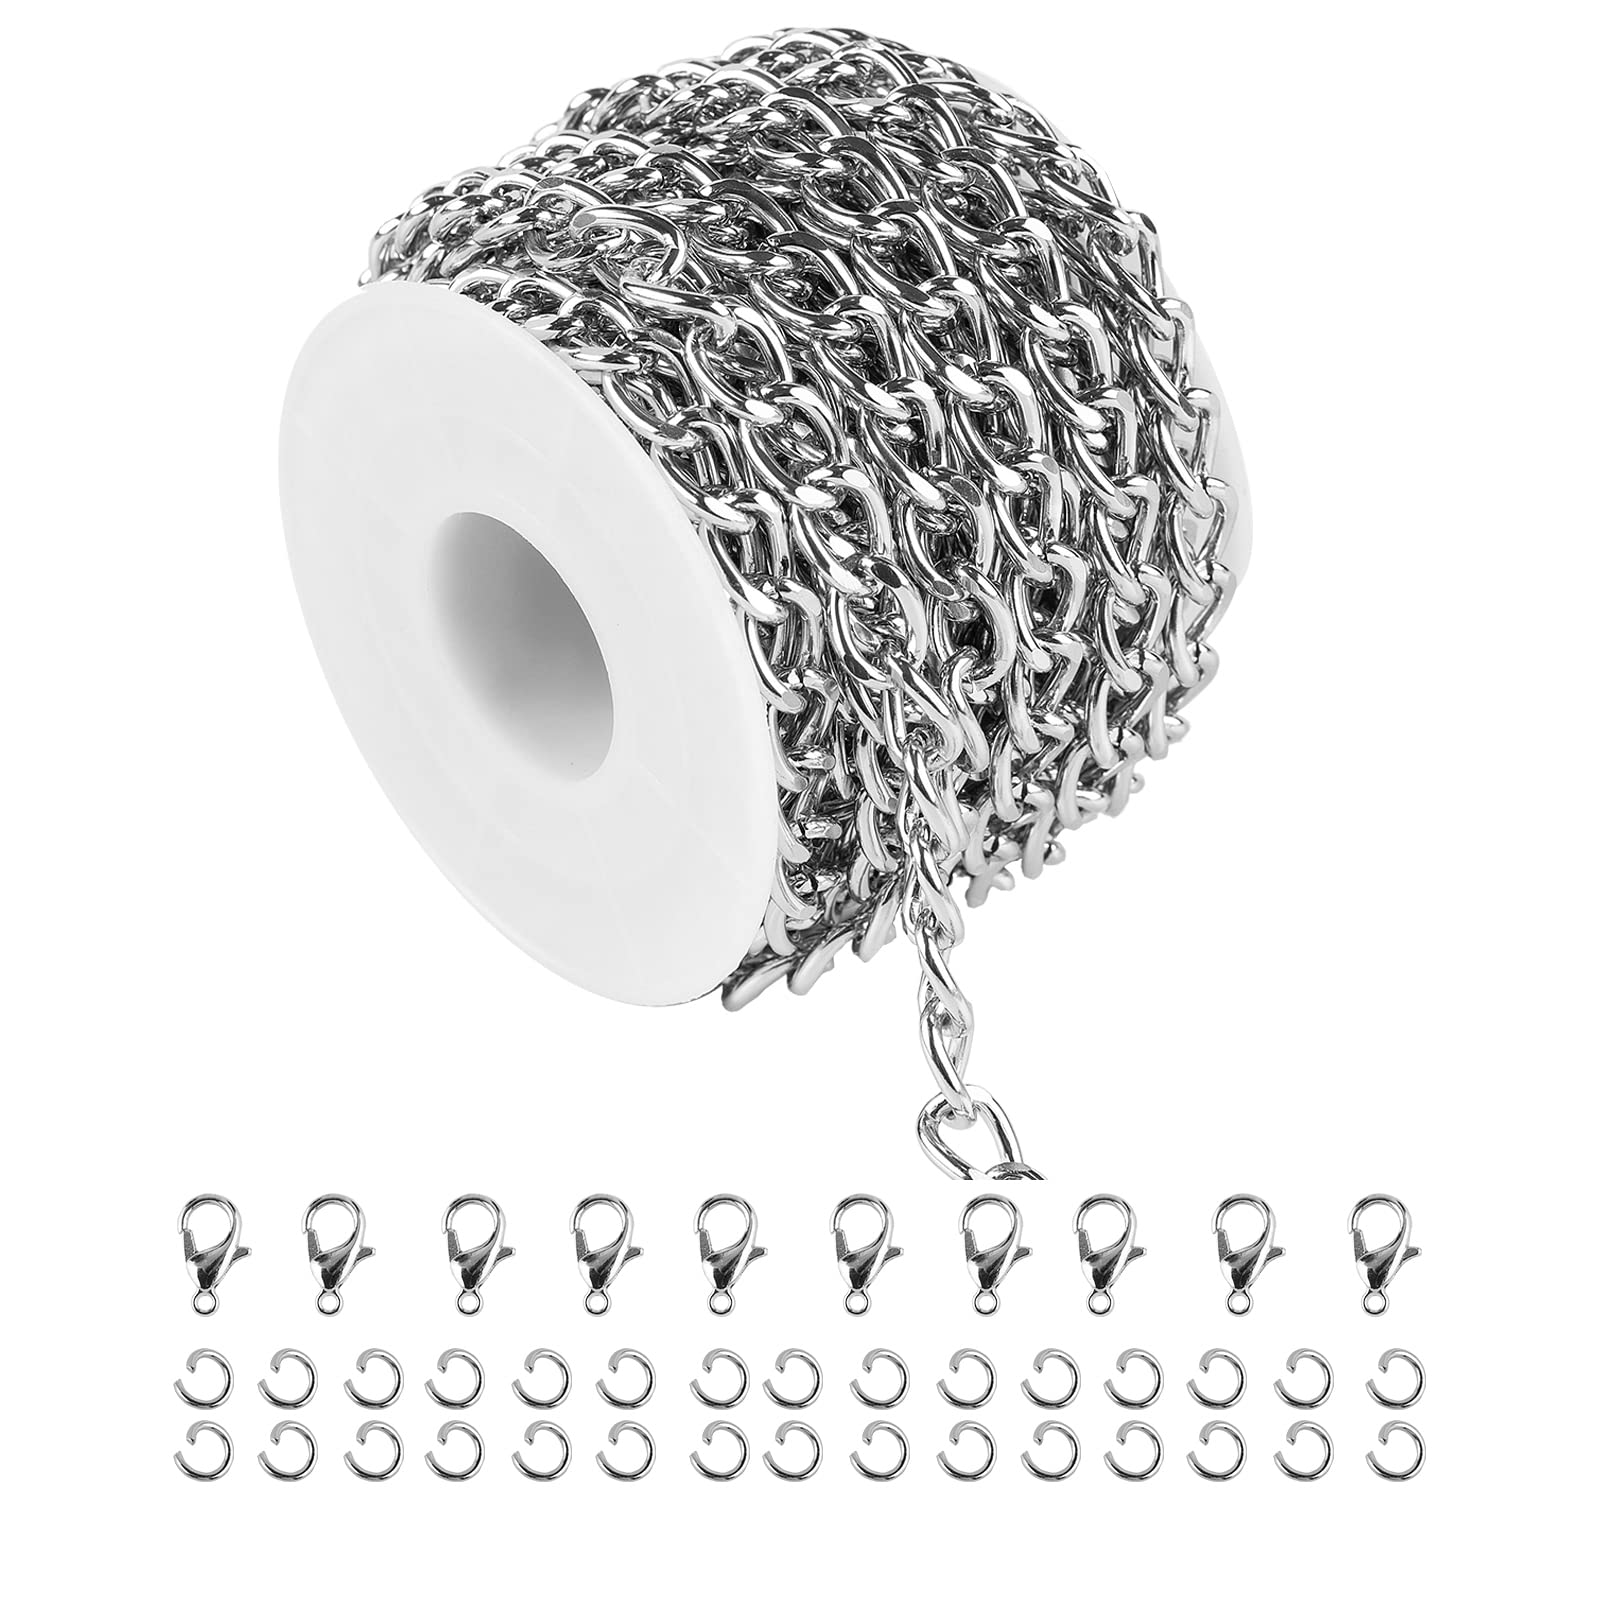 Curb Chain, Elegant Style Easy Convenient Craft Chain For